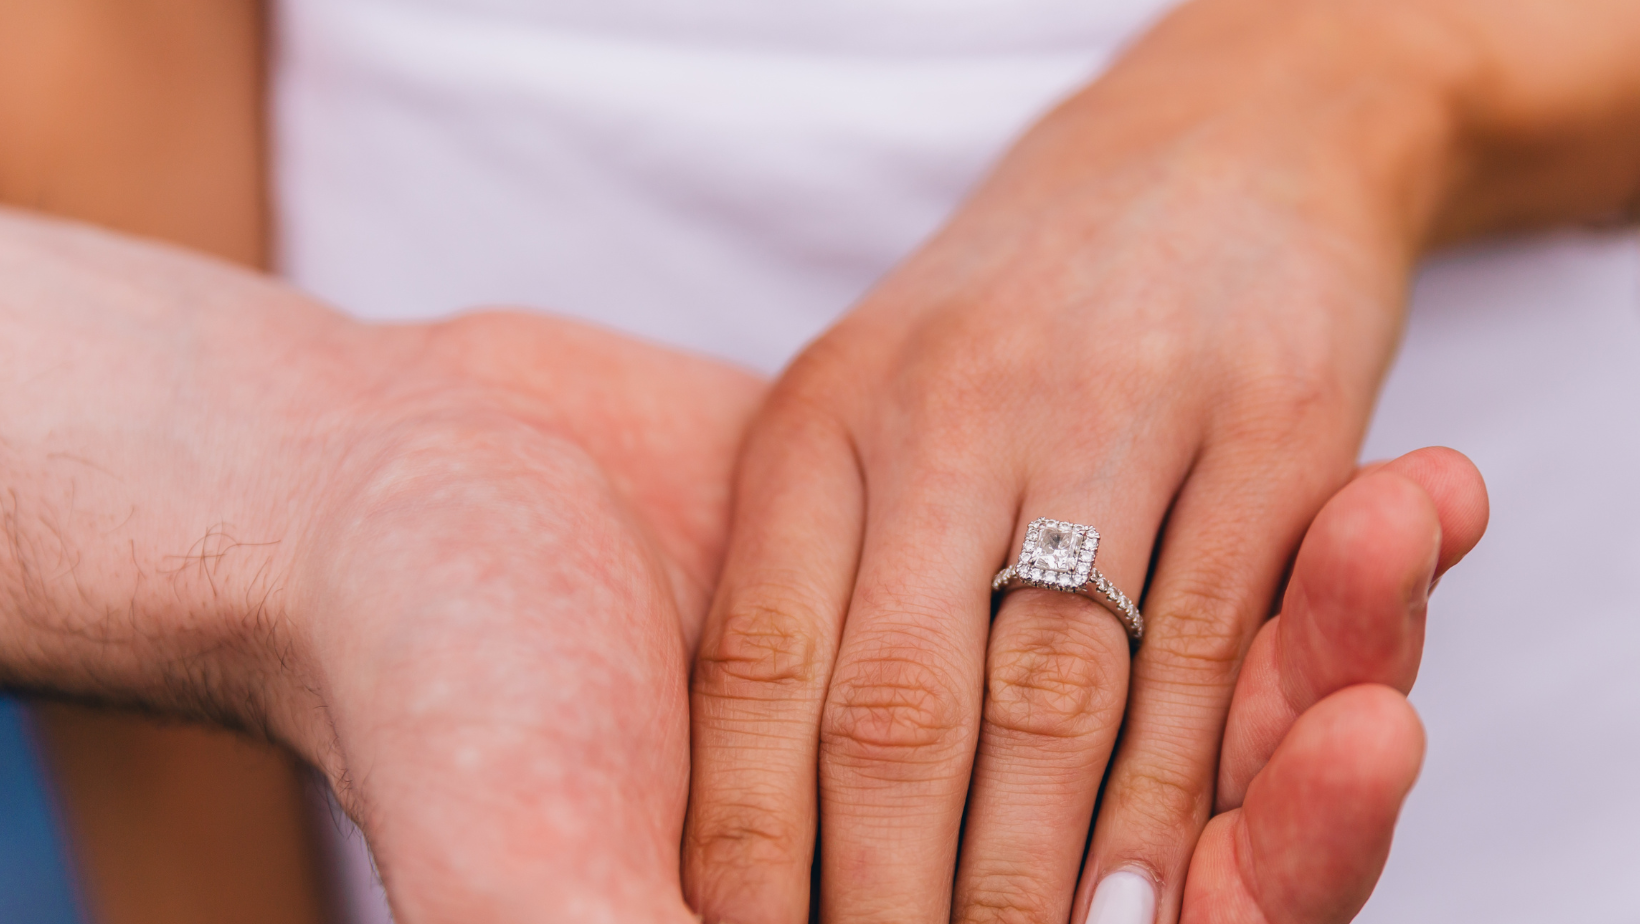 The Ultimate Guide To Buying A Small Diamond Ring - Tips & Tricks For Finding The Perfect Piece